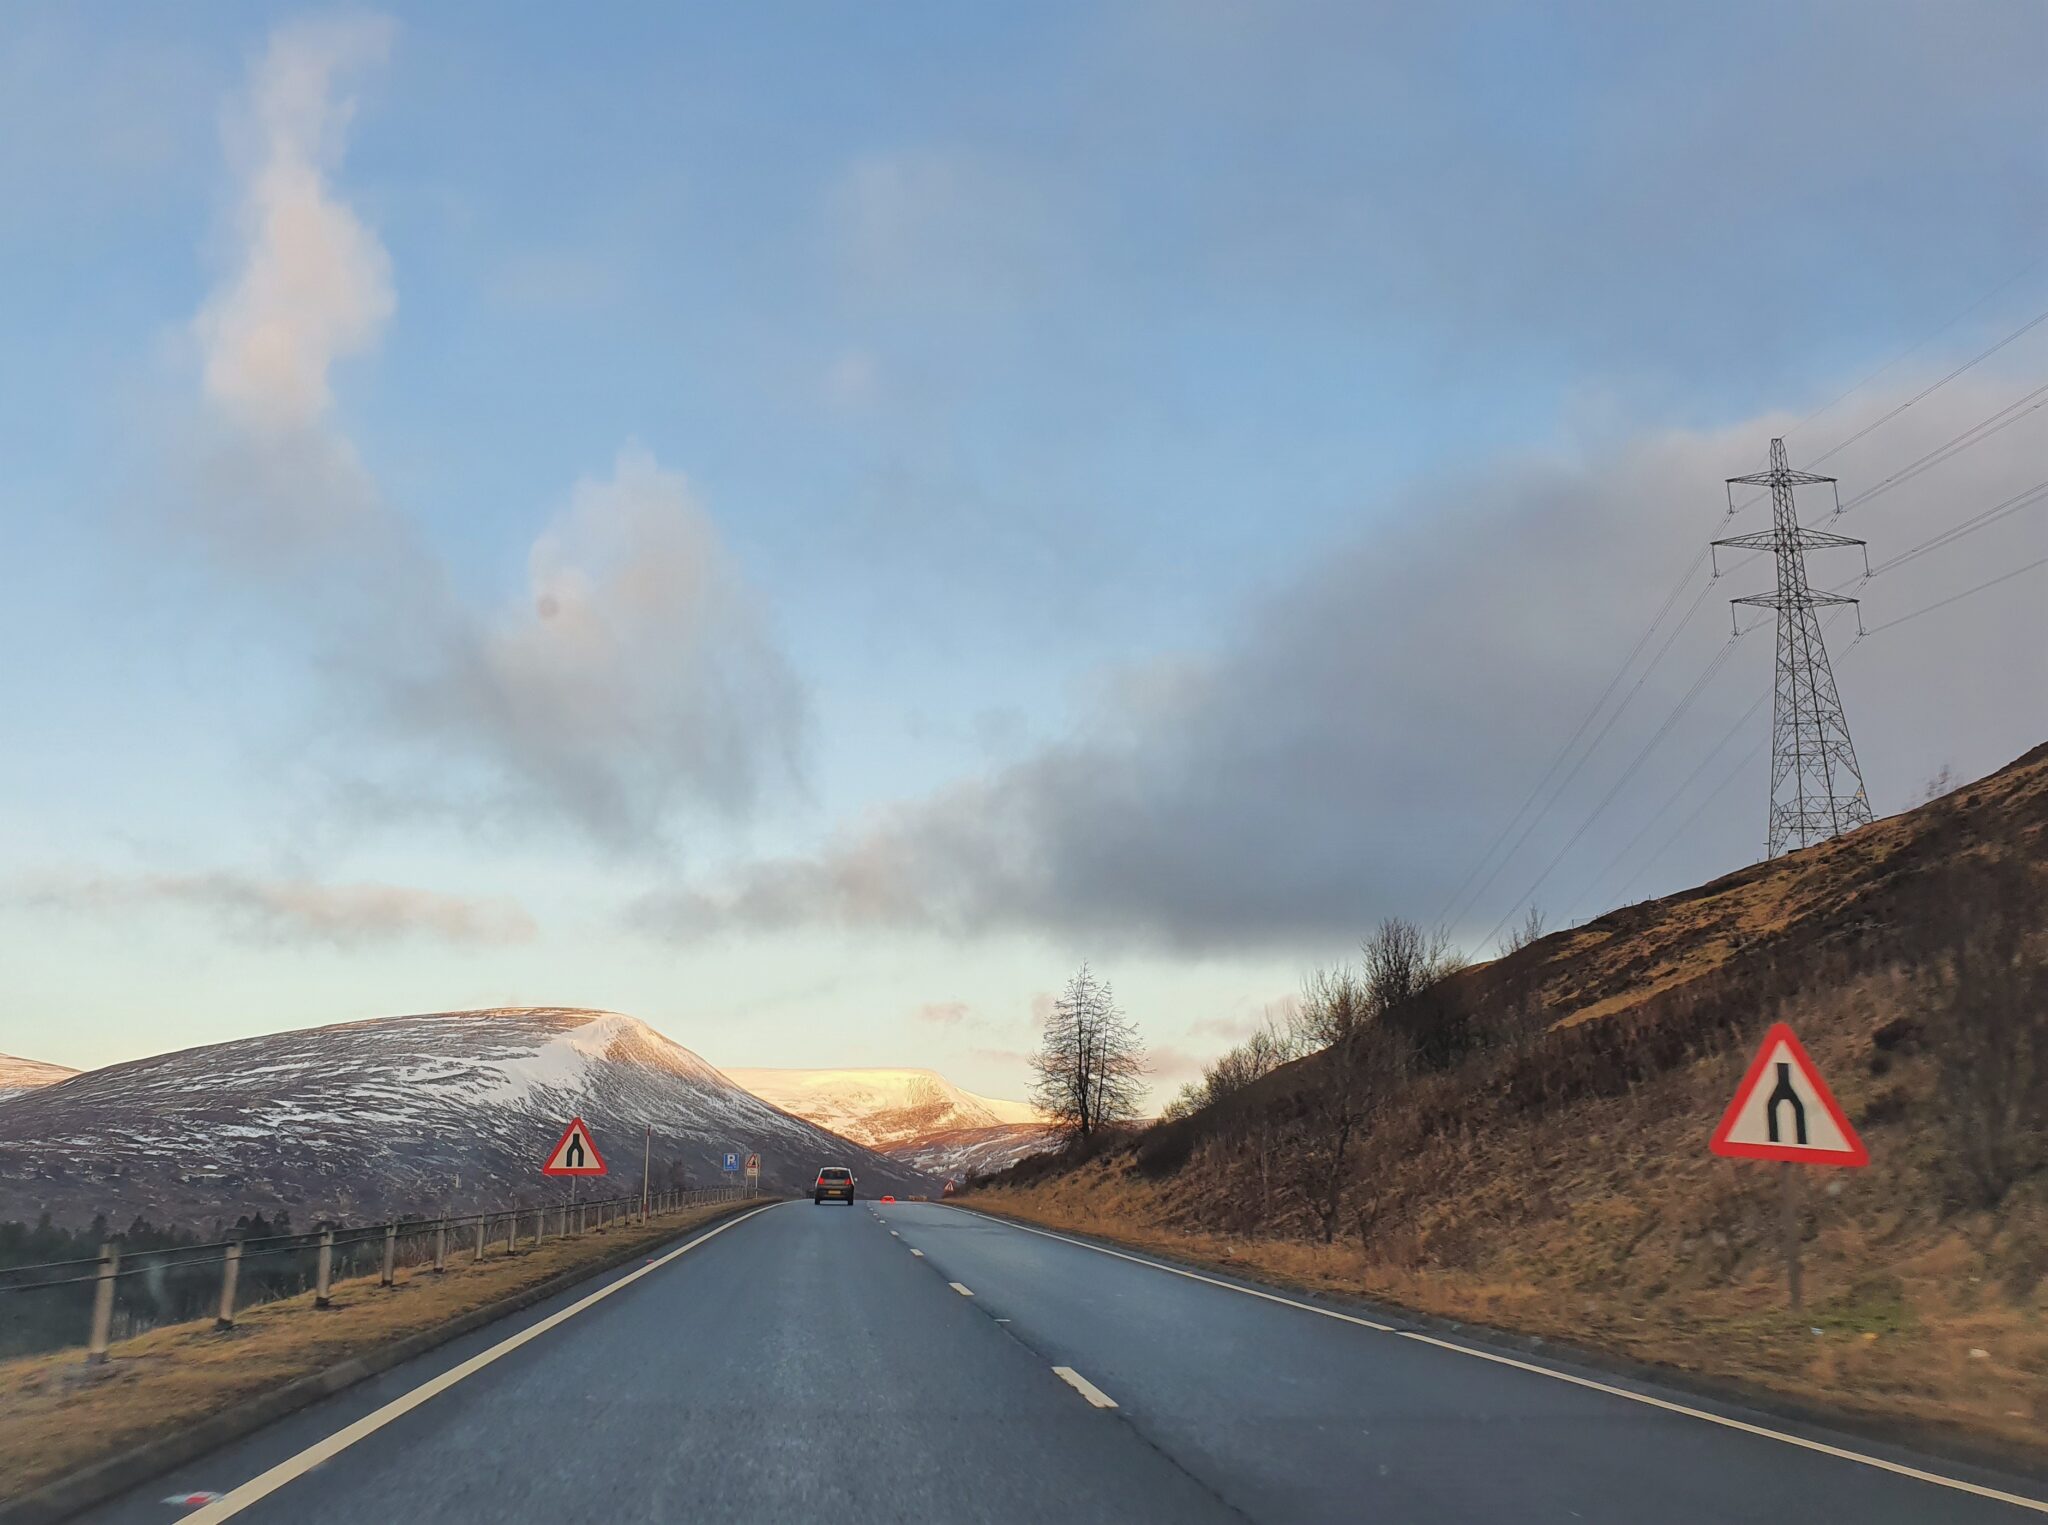 OVERNIGHT ESSENTIAL SURFACING IMPROVEMENTS PLANNED FOR THE A9 AT KINGUSSIE AND AVIEMORE